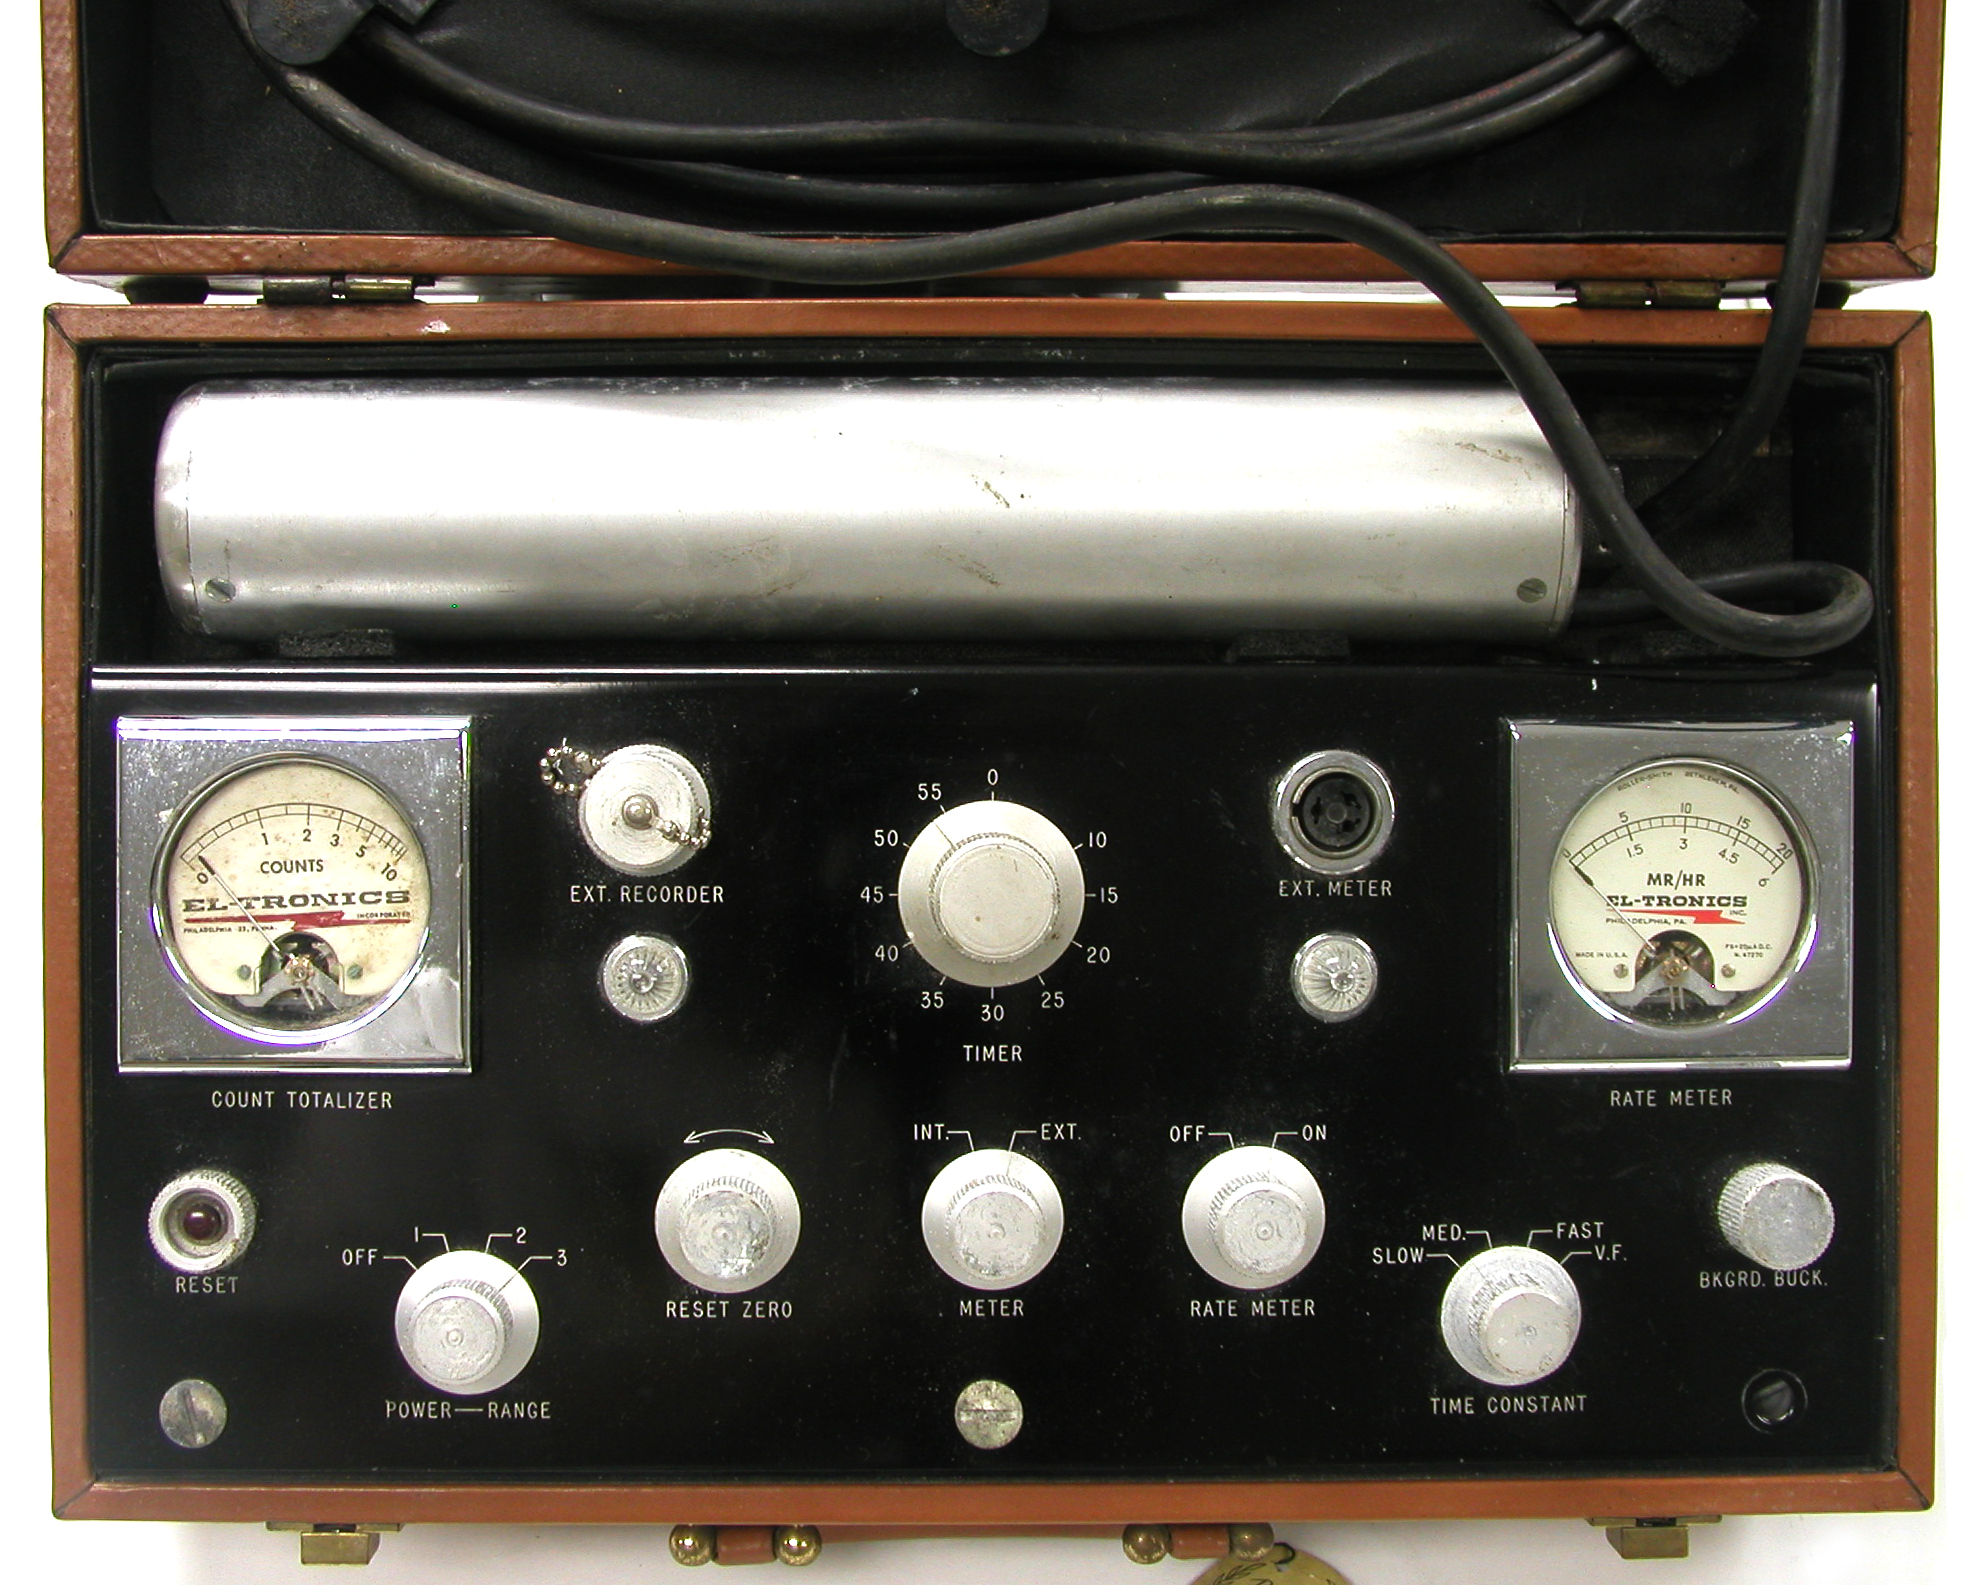 El-Tronics PR-32 Scintillation Counter (mid to late 1950s)